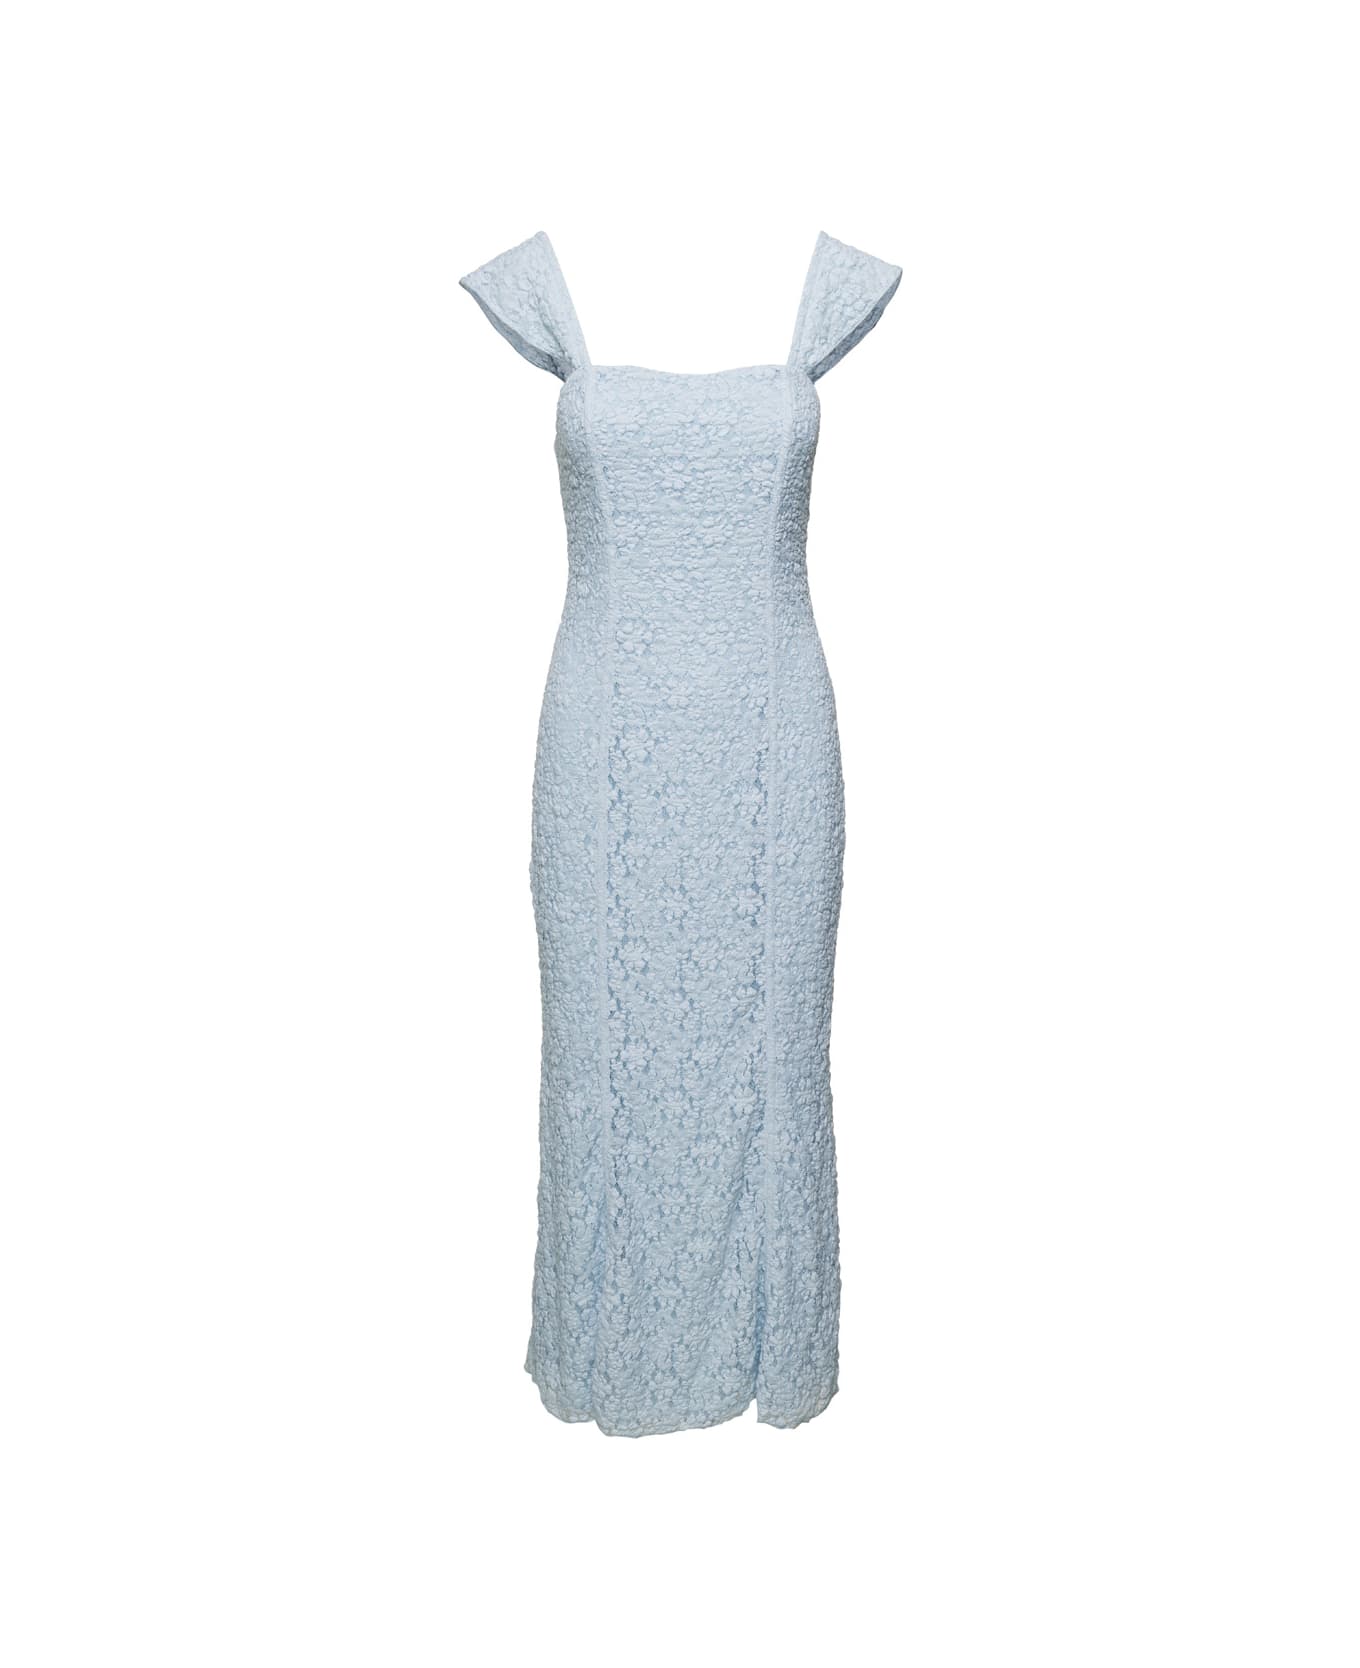 Rotate by Birger Christensen Lace Wide Strap Dress - Omphalodes